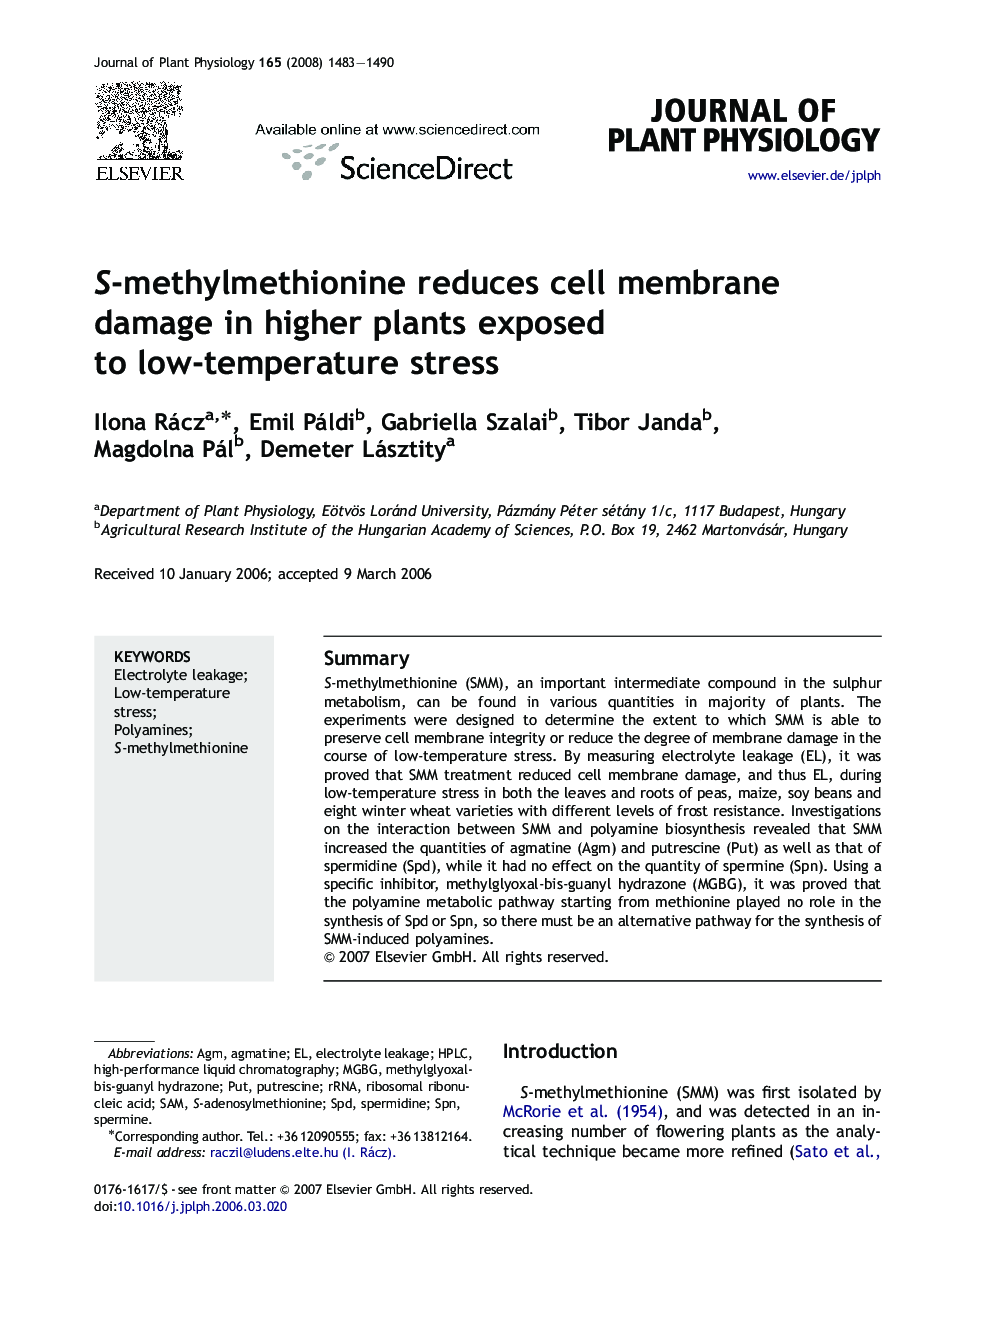 S-methylmethionine reduces cell membrane damage in higher plants exposed to low-temperature stress